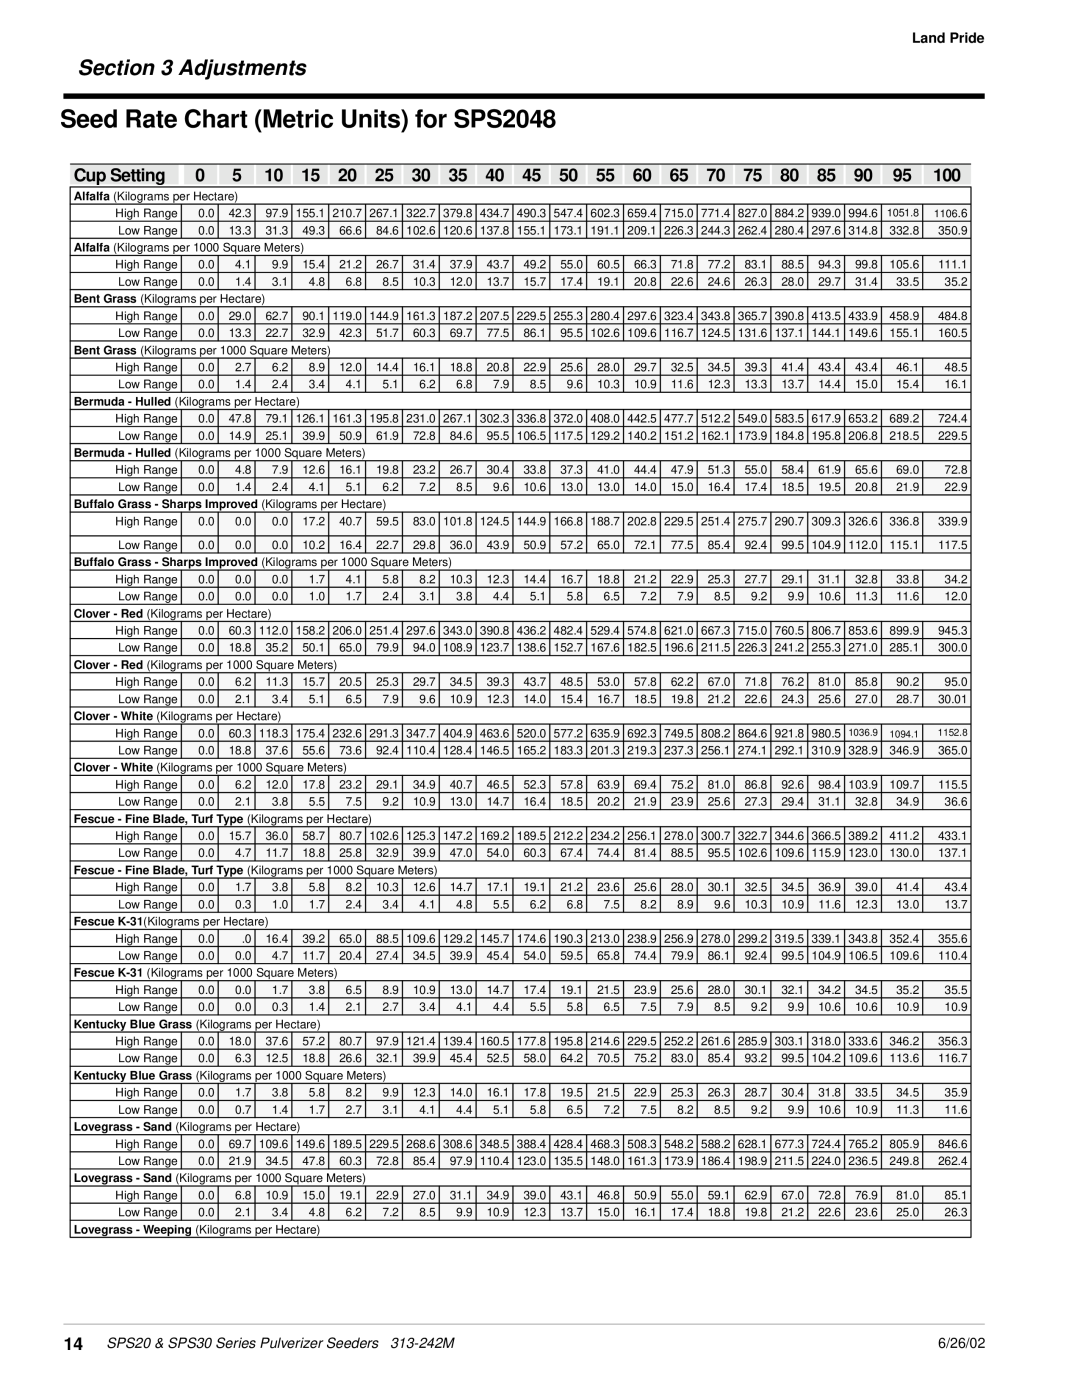 Land Pride SPS30 manual Seed Rate Chart Metric Units for SPS2048, Adjustments, Cup Setting, Land Pride, 6/26/02 